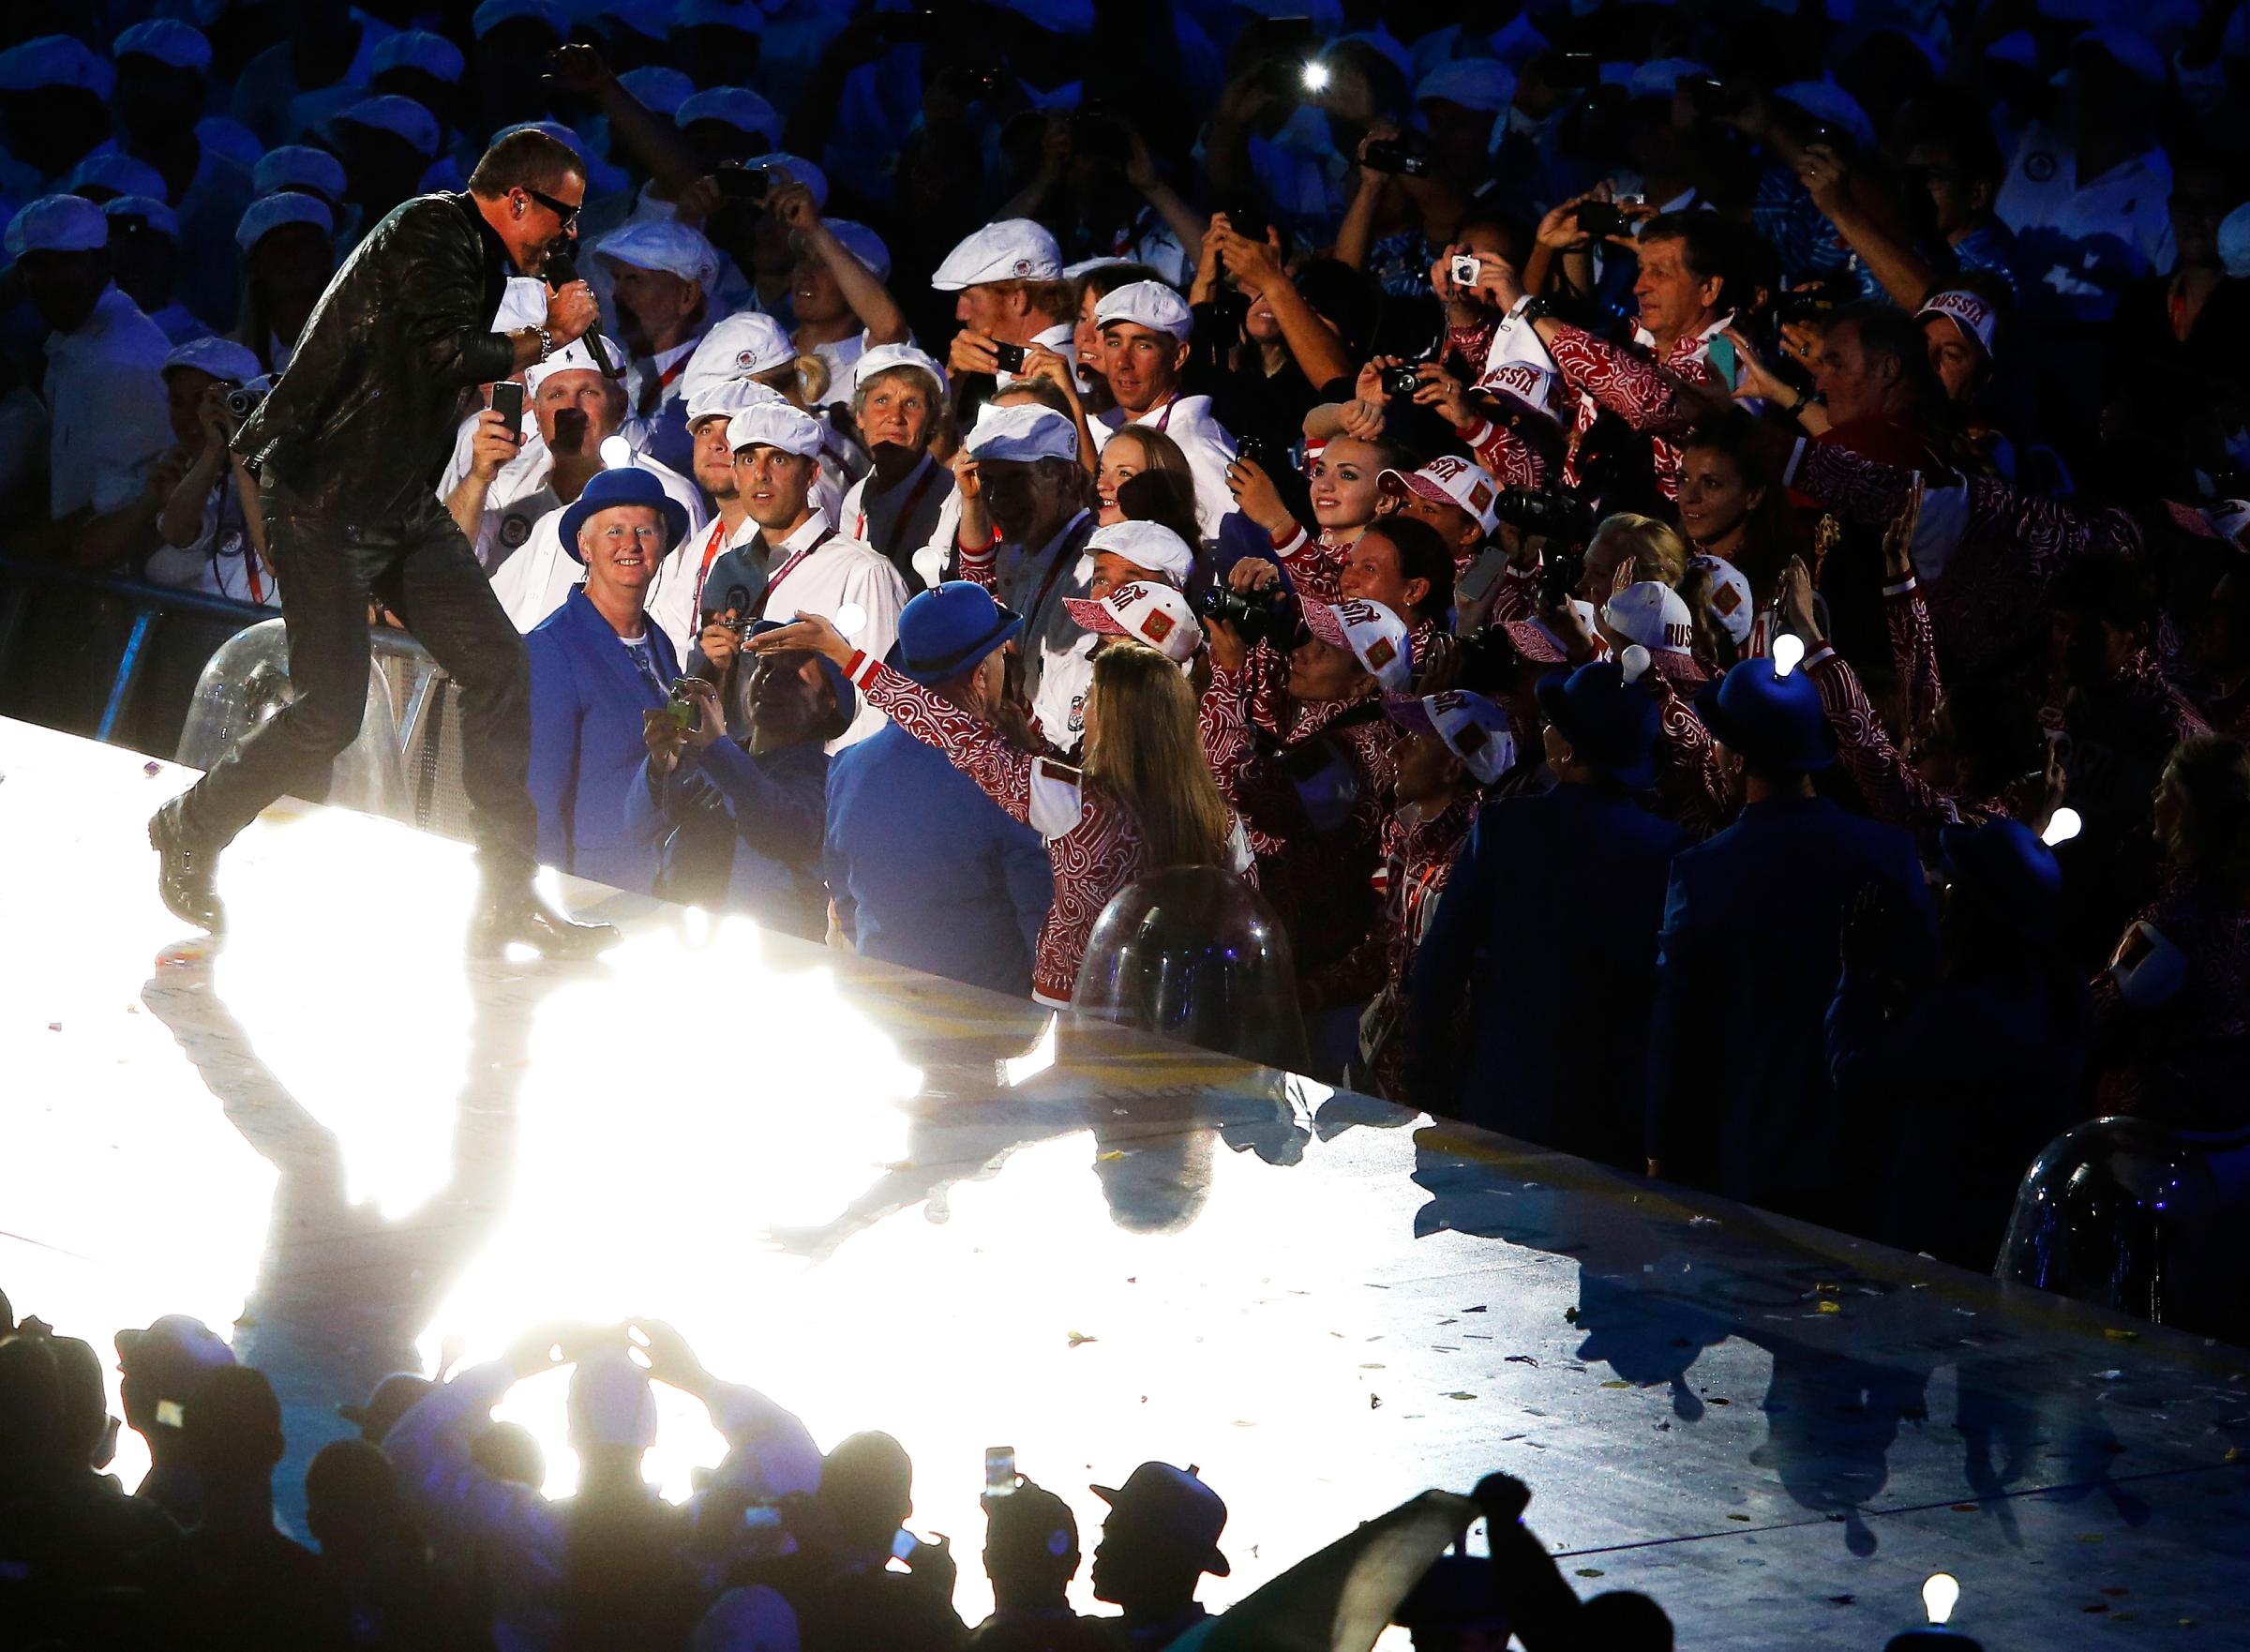 George Michael performs during the Closing Ceremony on Day 16 of the London 2012 Olympic Games at Olympic Stadium in London, on Aug. 12, 2012.